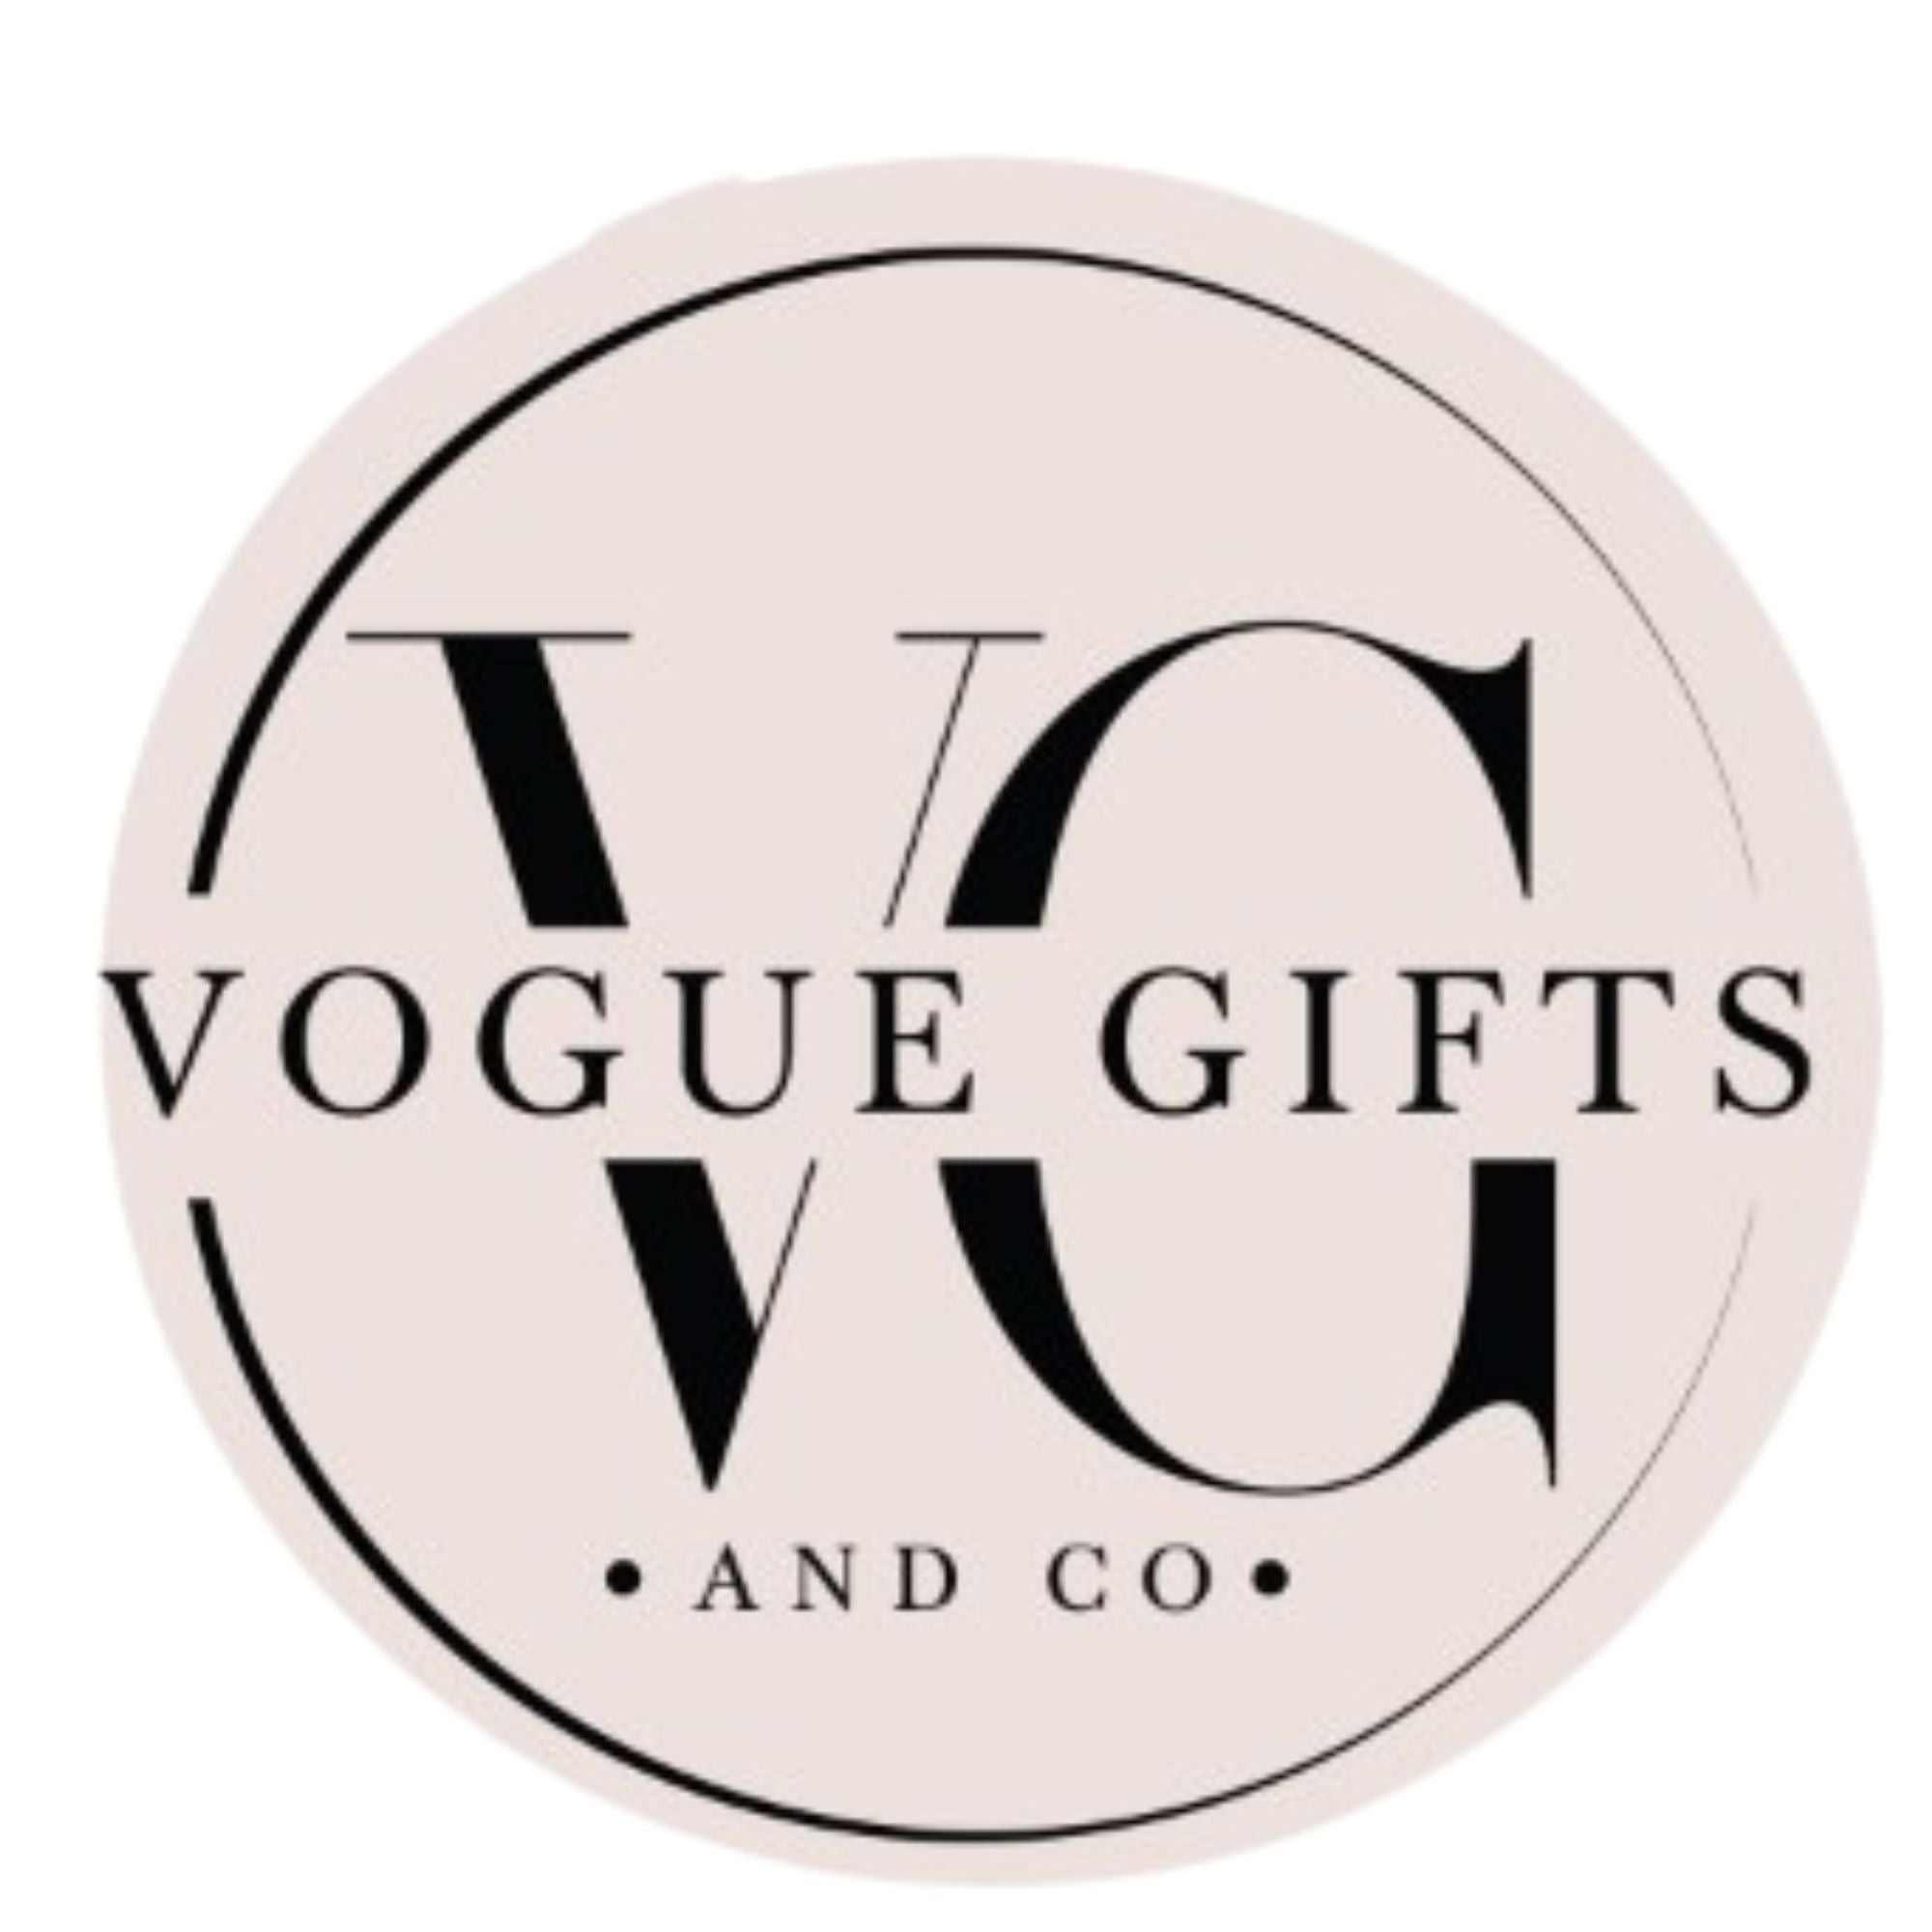 Vogue Gifts & Co